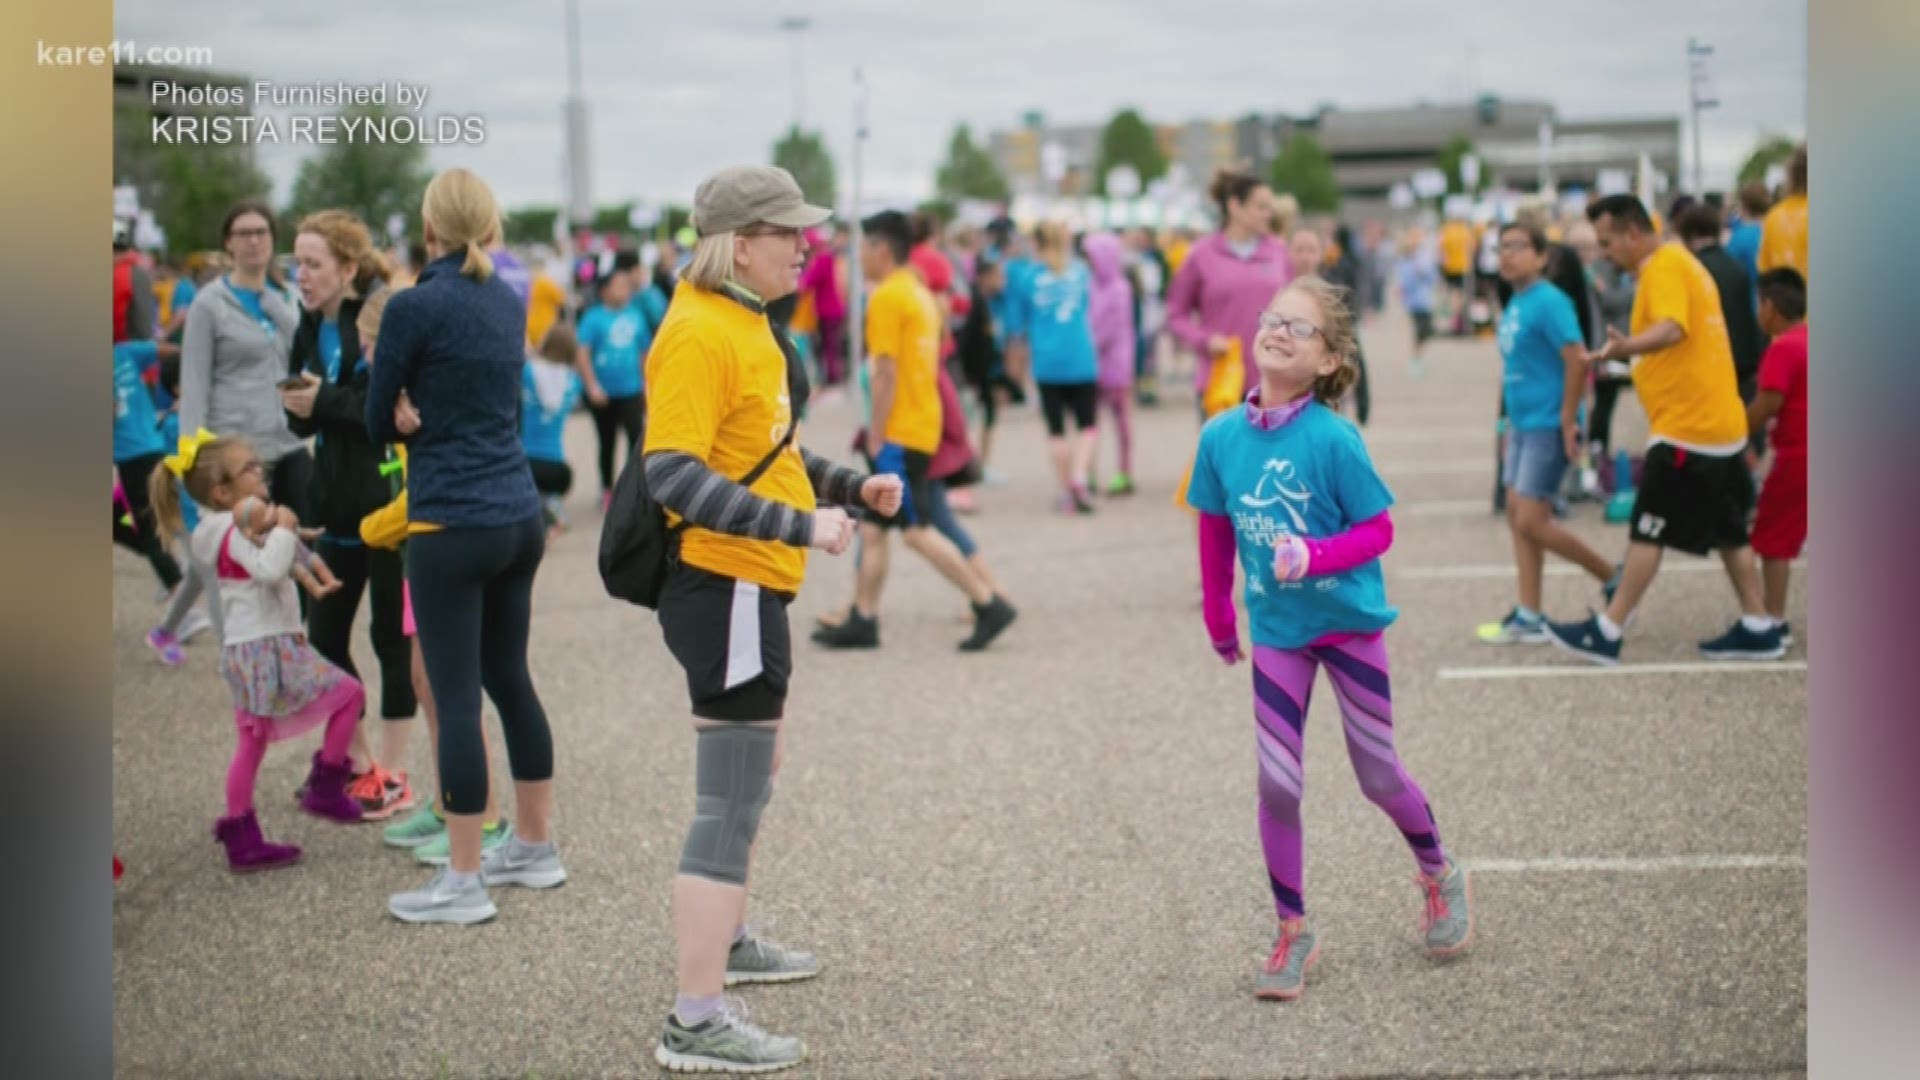 The bi-annual "Girls On The Run" Twin Cities 5K is Saturday, November 10 from 7 a.m. to noon at the
Mall of America in the East parking lot near Sears Court in Bloomington.